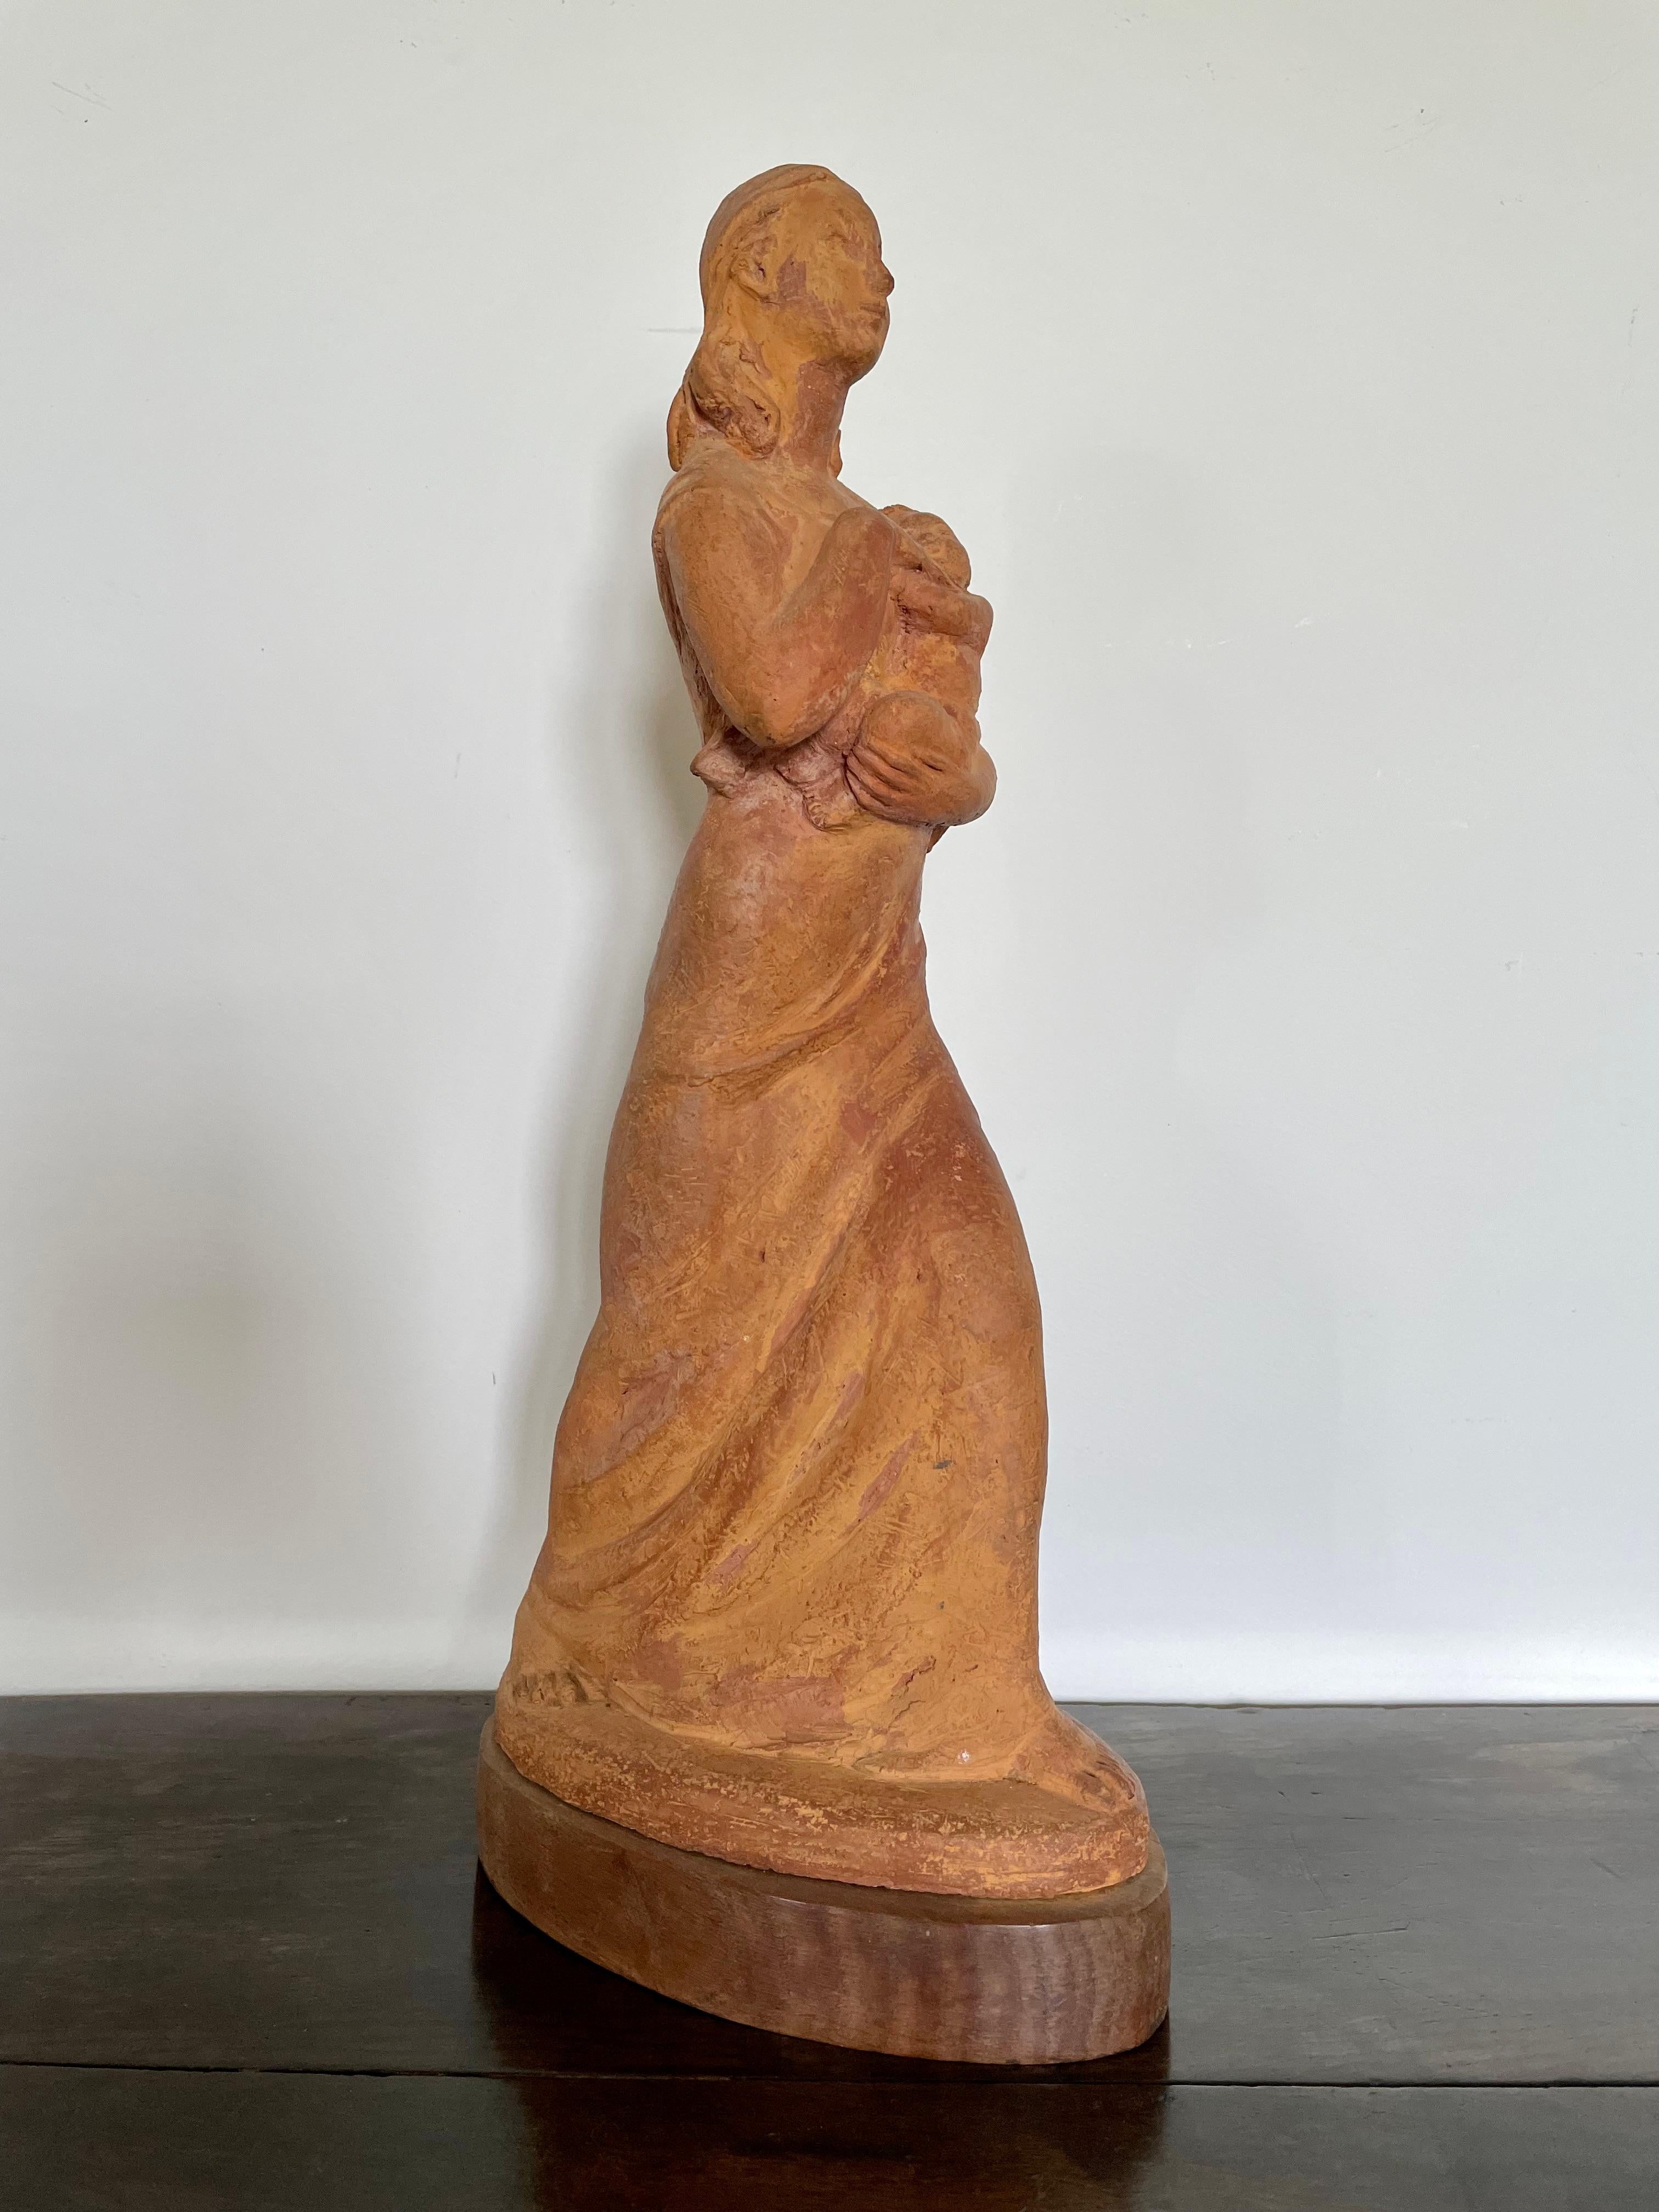 Mother and Child - 20th Century British terracotta figure by Lady Muriel Wheeler